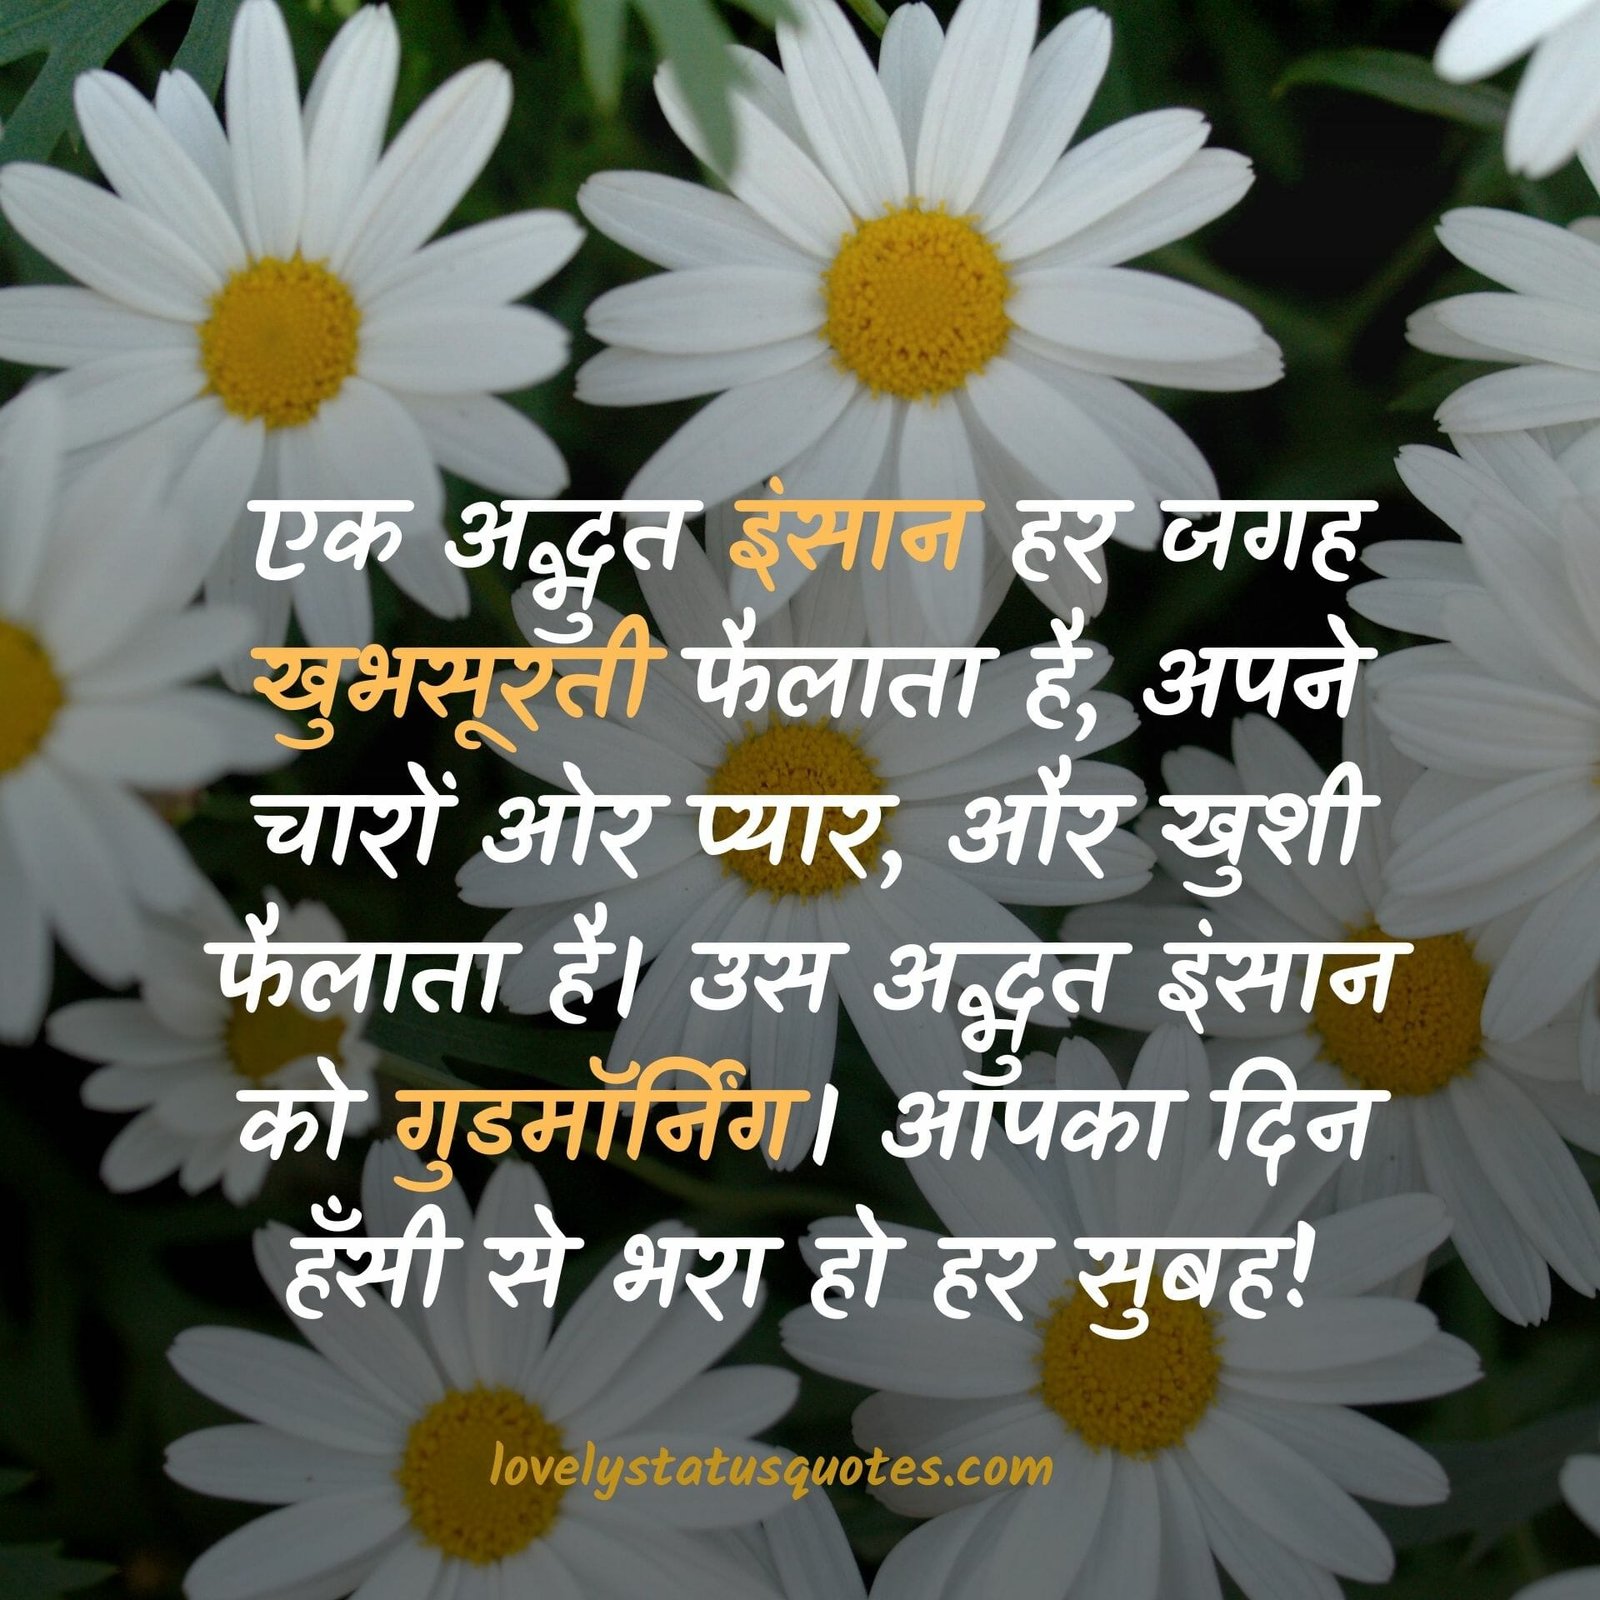 Good morning flowers quotes